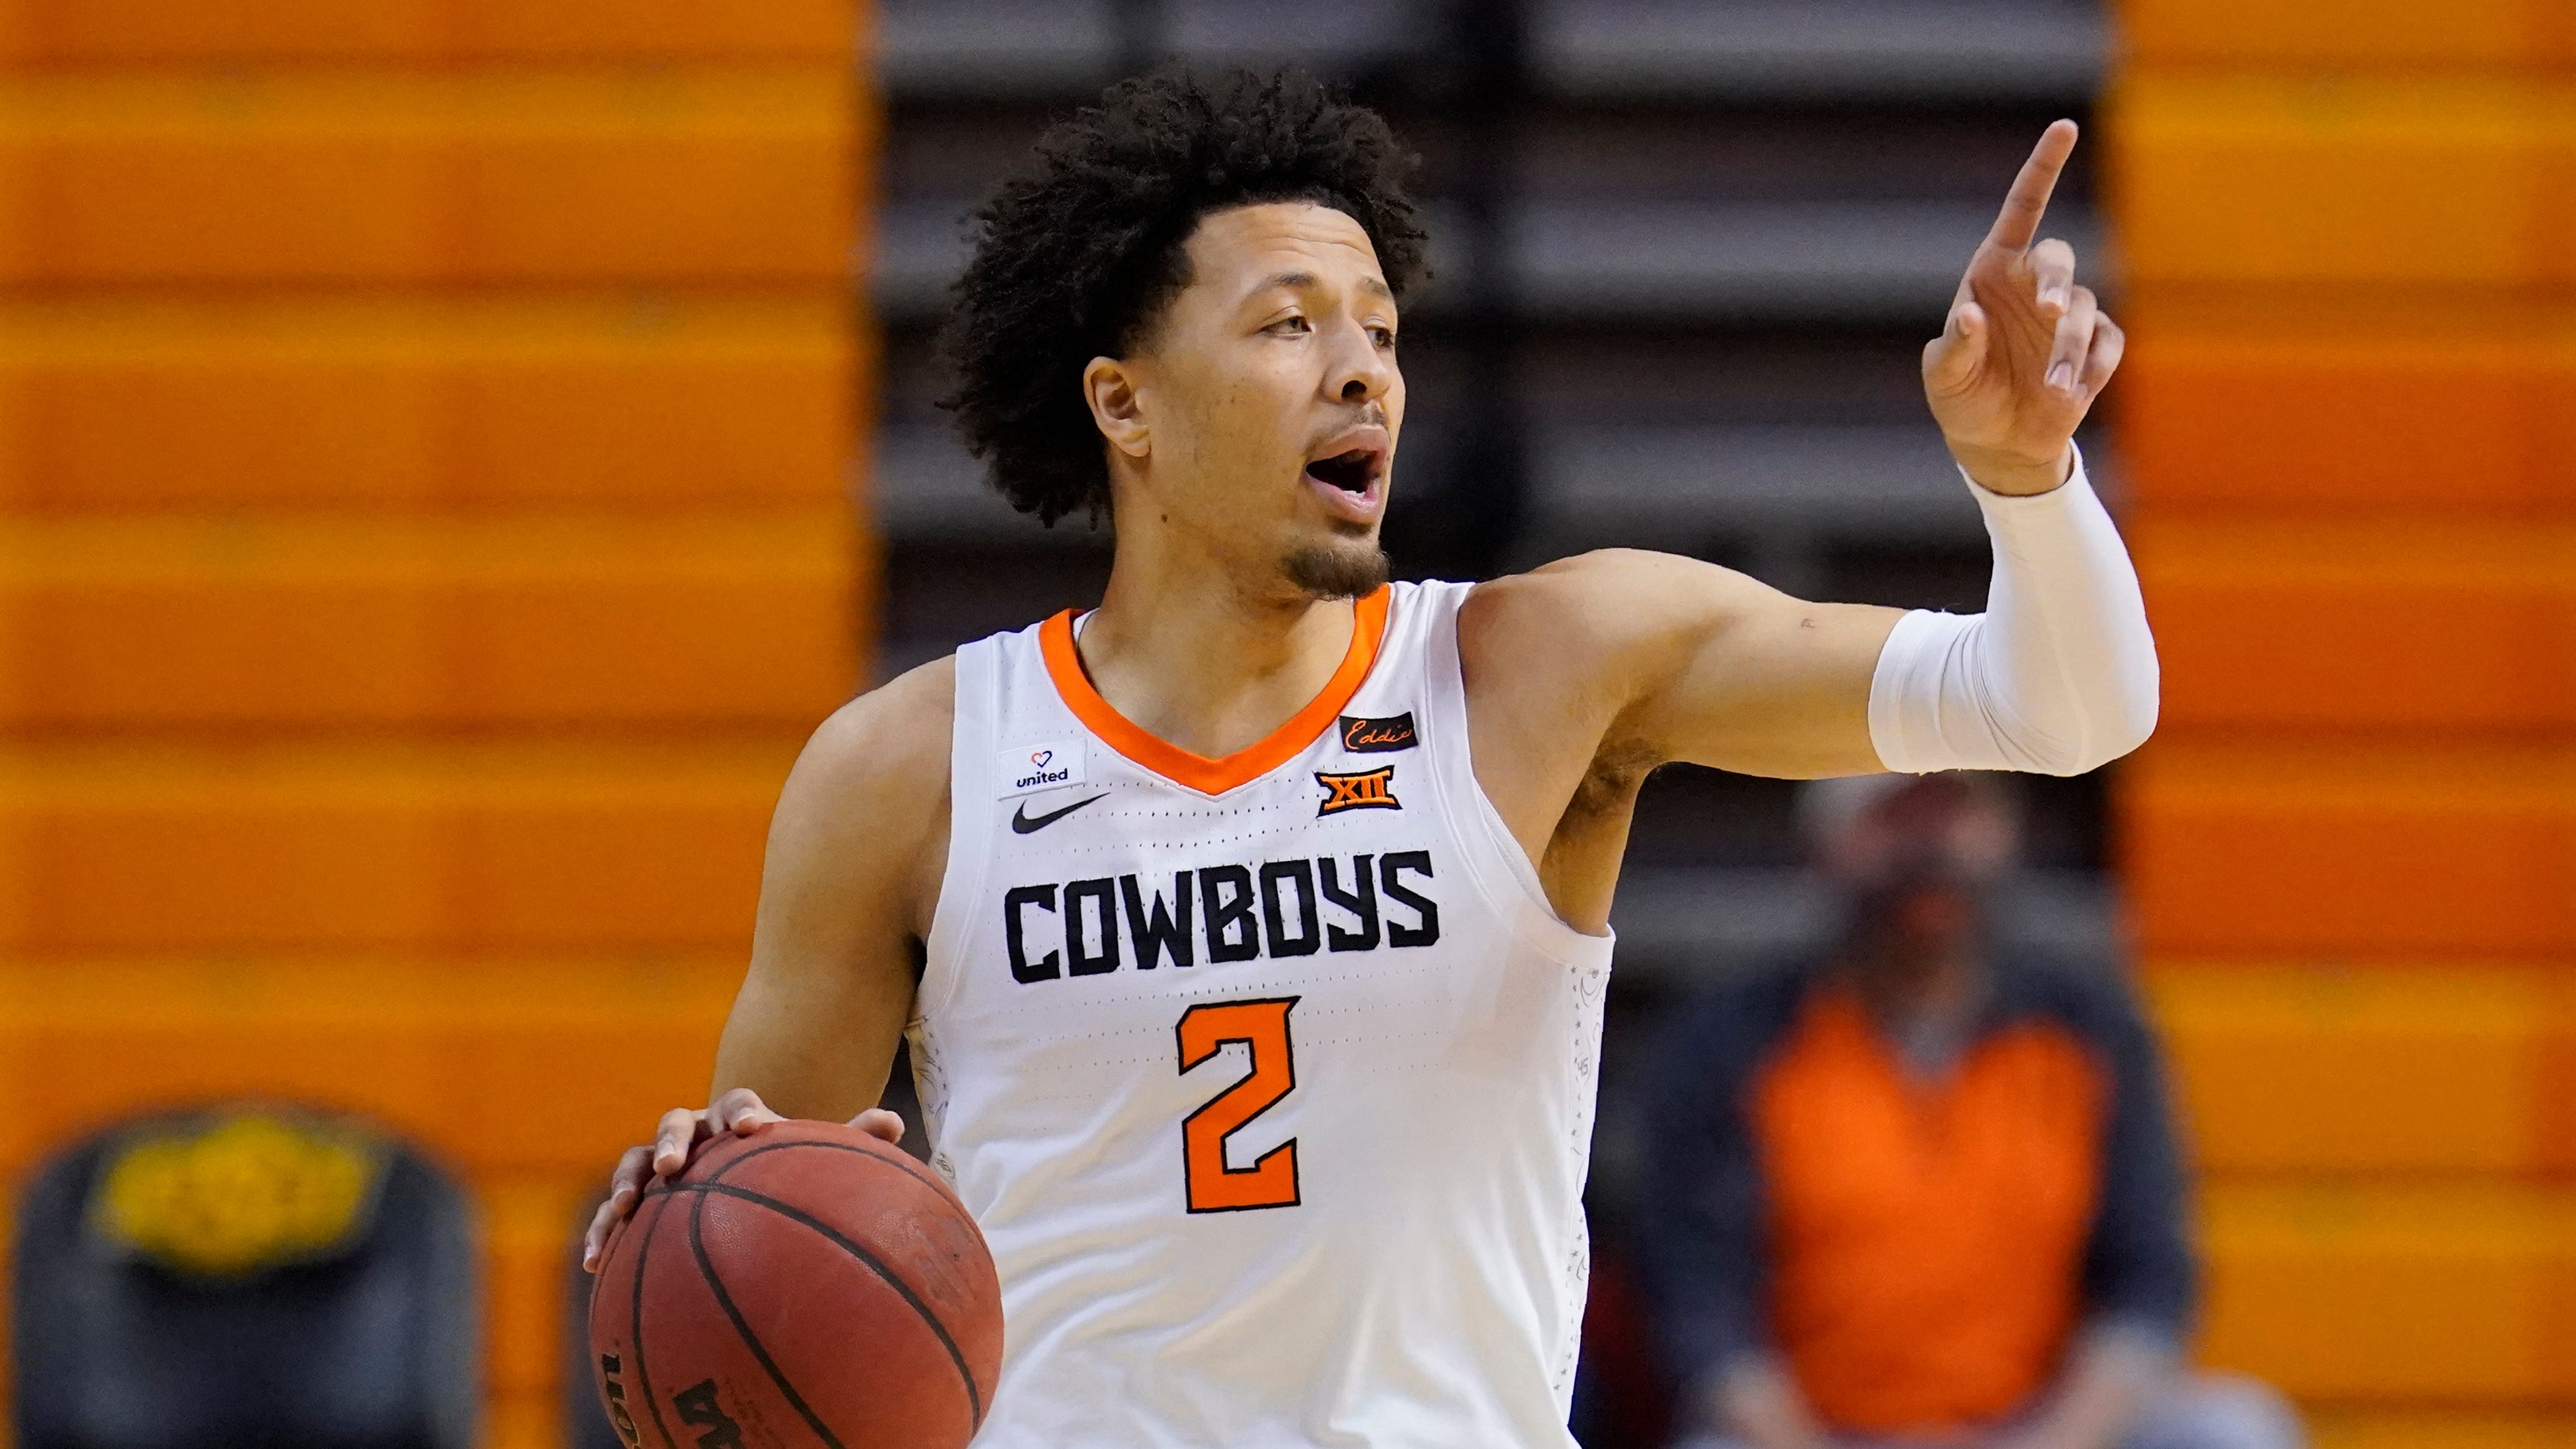 Oklahoma State basketball: March Madness 2021 bracket, schedule